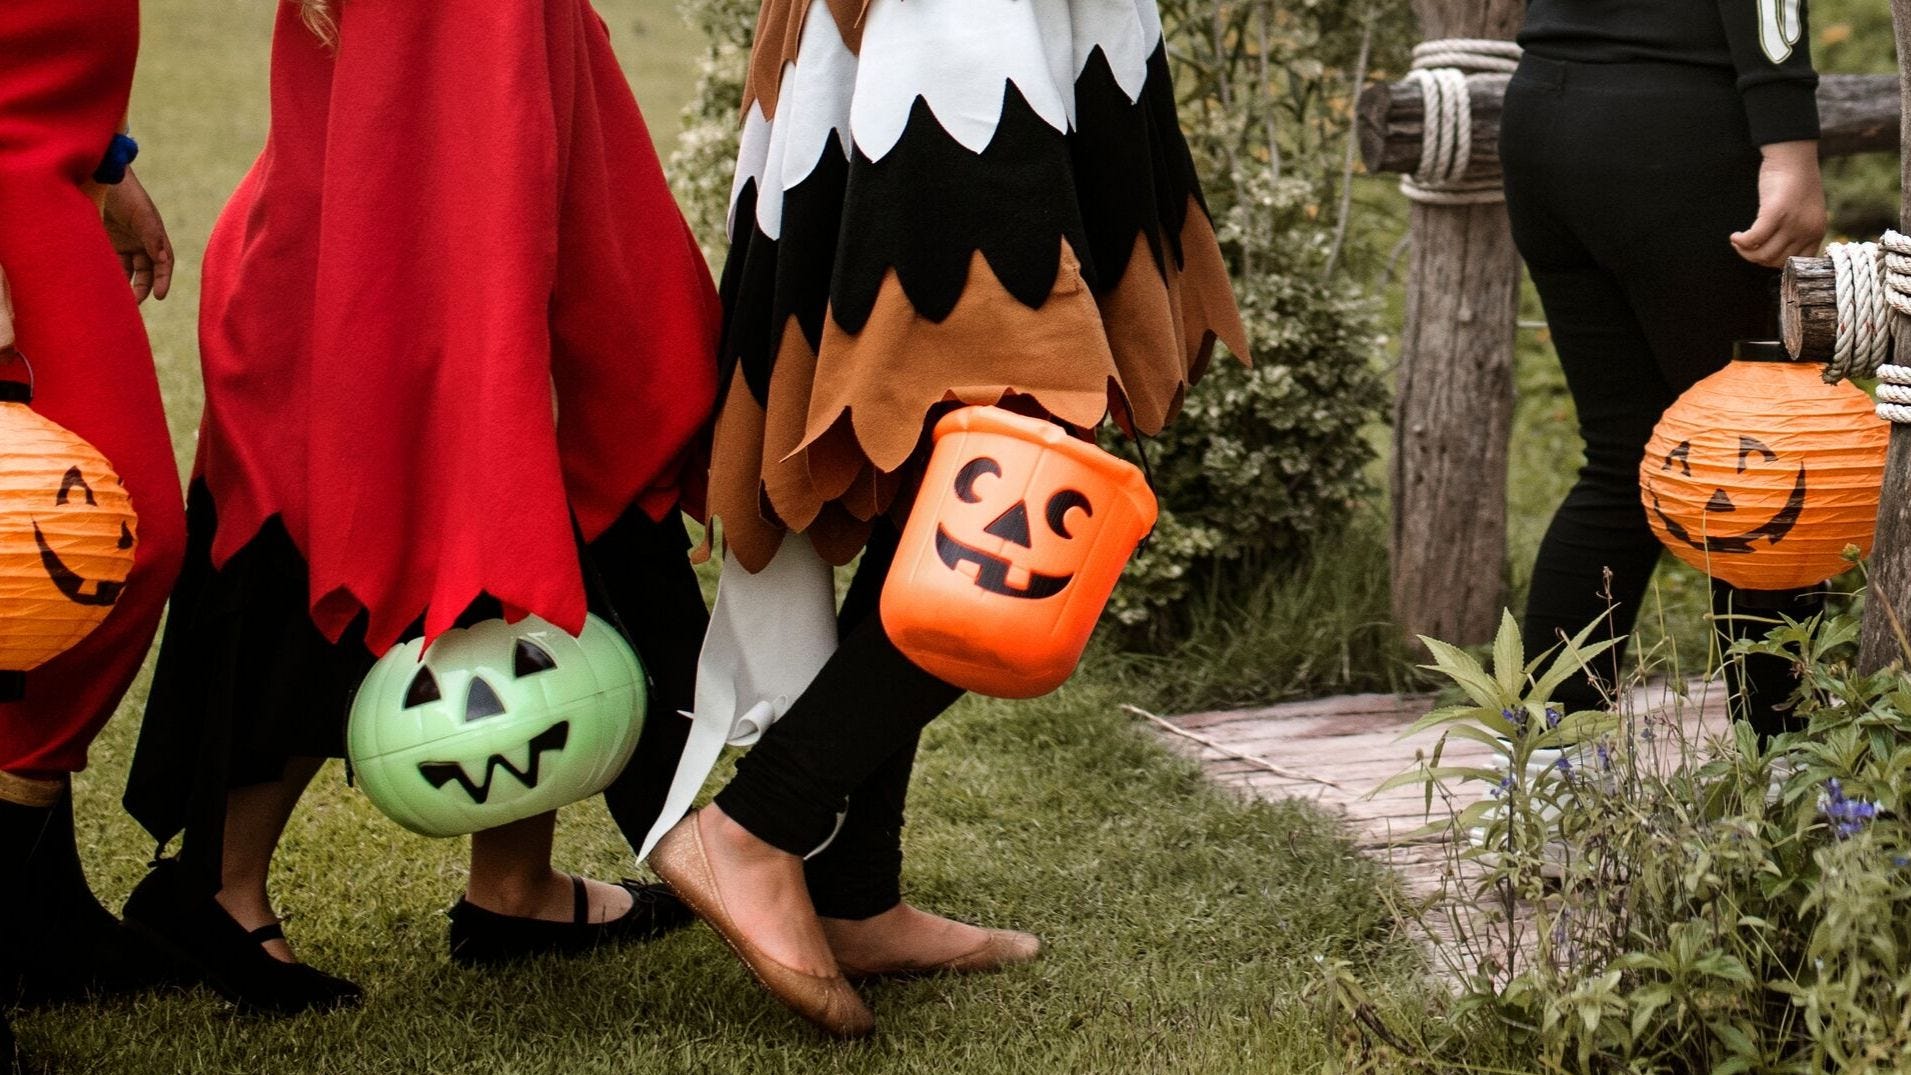 No trick or treating for Halloween, says Dr. Paul